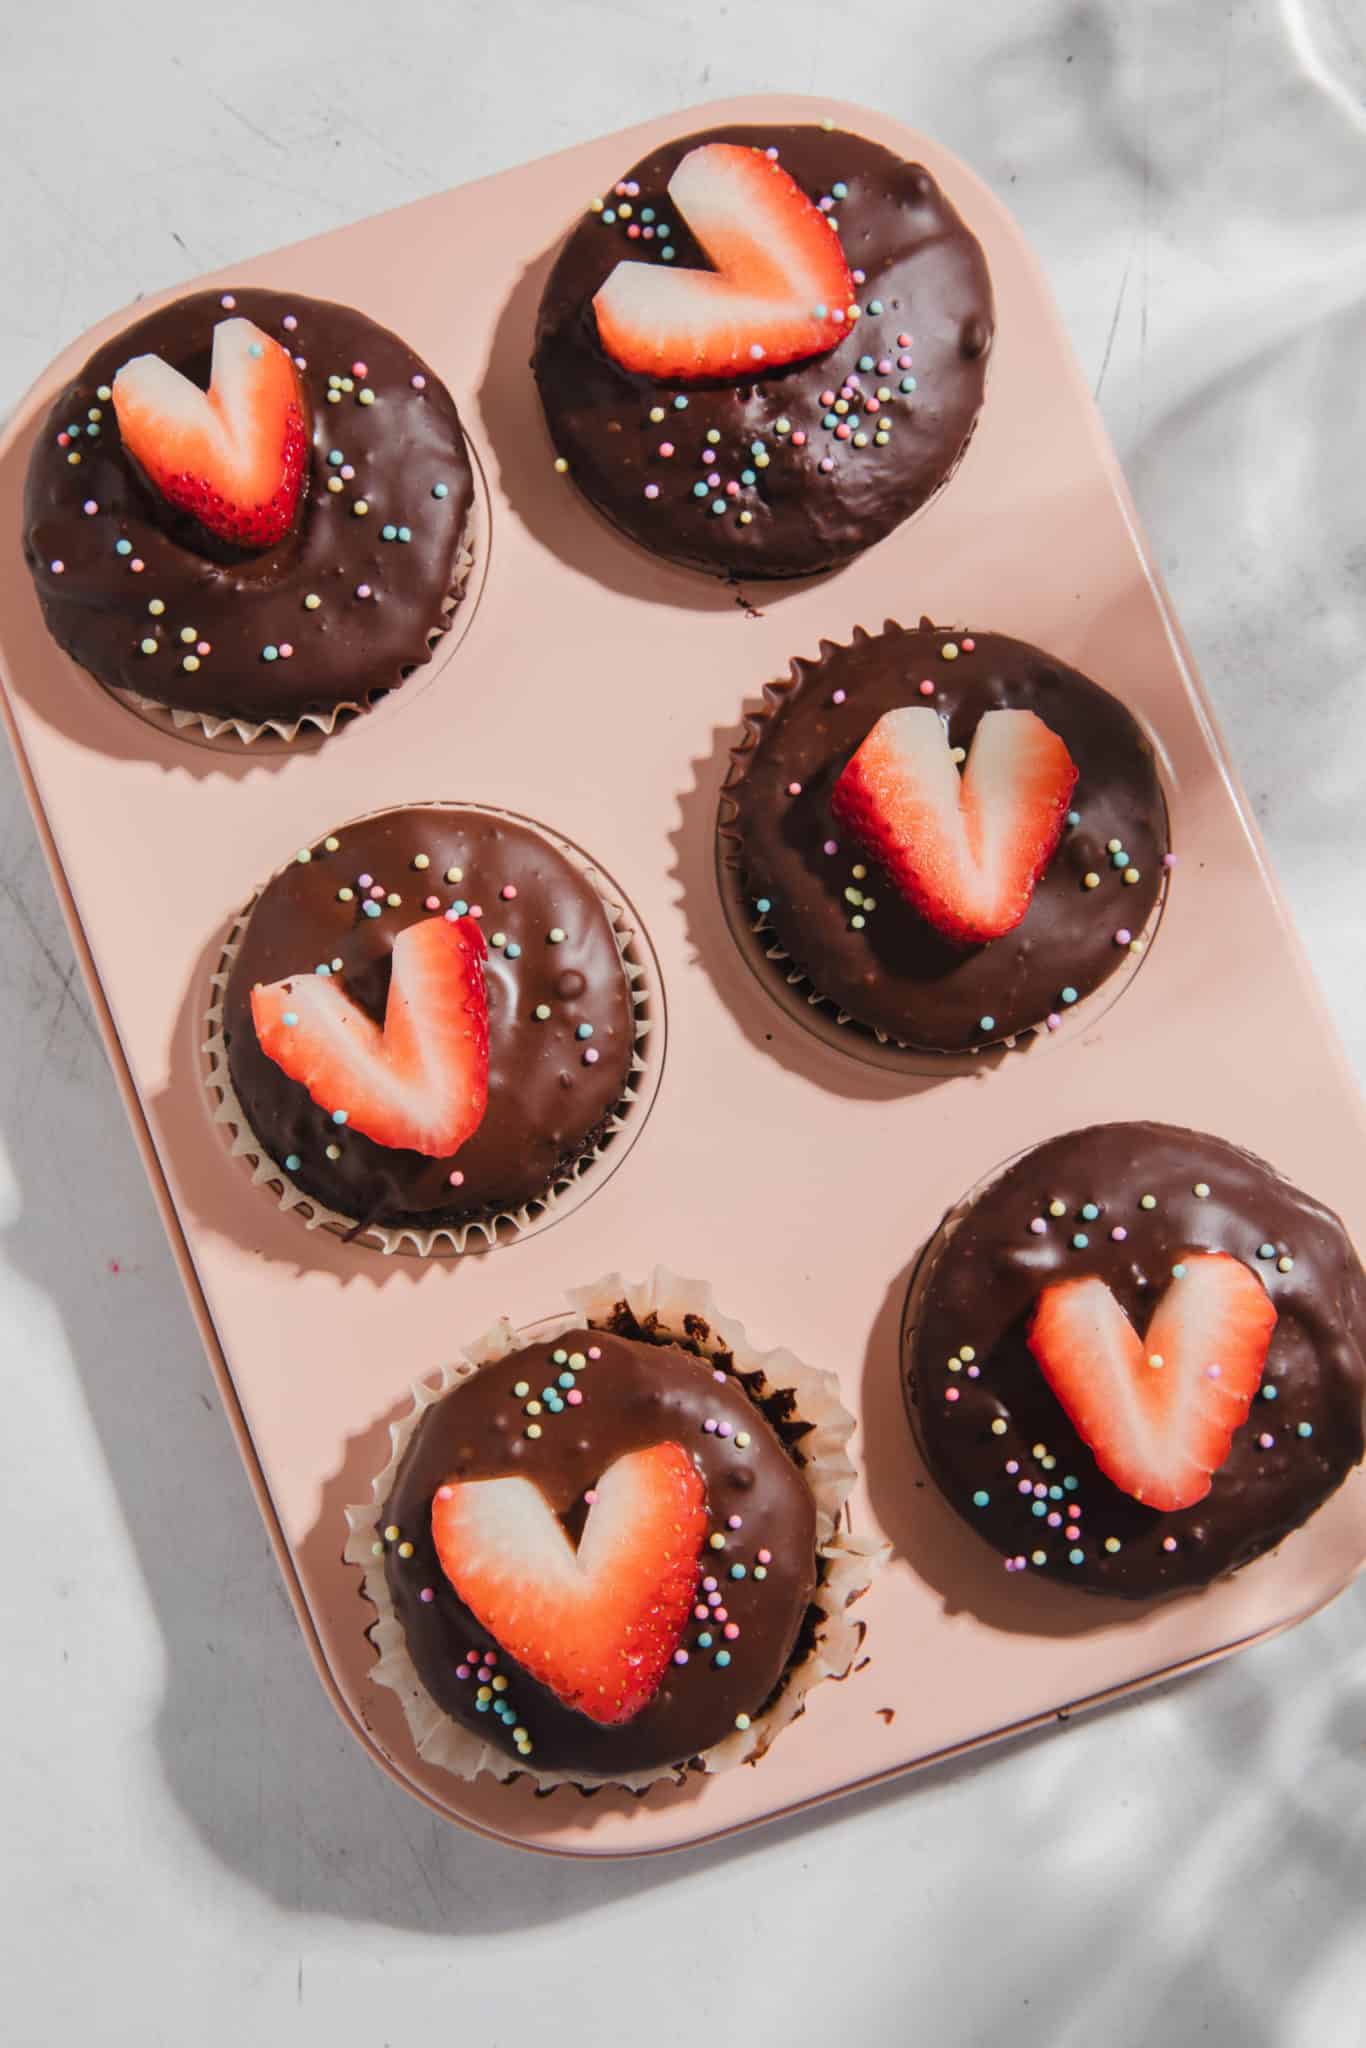 gluten free cupcakes in a pink tin with chocolate ganache and strawberries